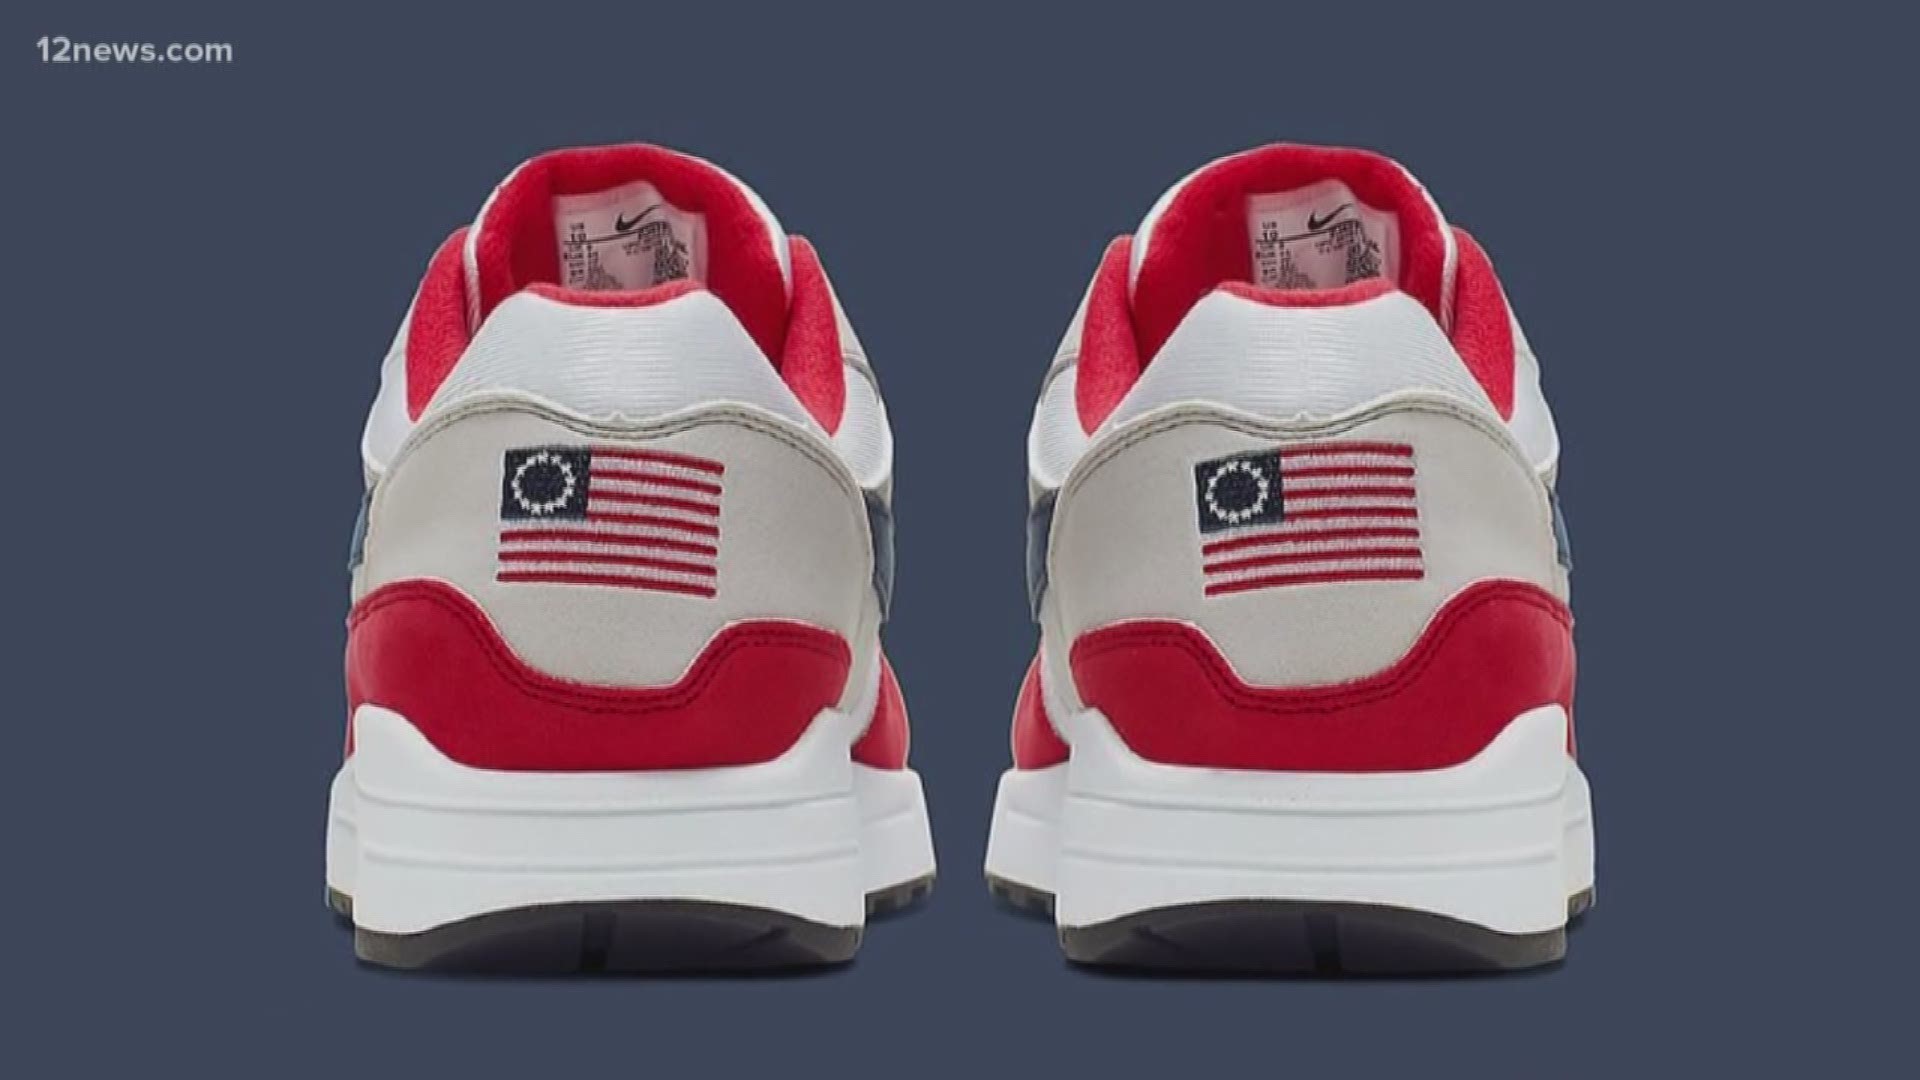 A pair of sneakers is at the center of a controversy between Nike, Arizona Governor Doug Ducey, football player Colin Kaepernick and the American flag said to be designed by Betsy Ross. Nike decided not to release the shoe after Kaepernick pointed out the flag has been used by white supremacist groups. Doug Ducey weighed in by saying he would be pulling incentives for Nike that were tied to do a deal that would bring a Nike factory to Goodyear.